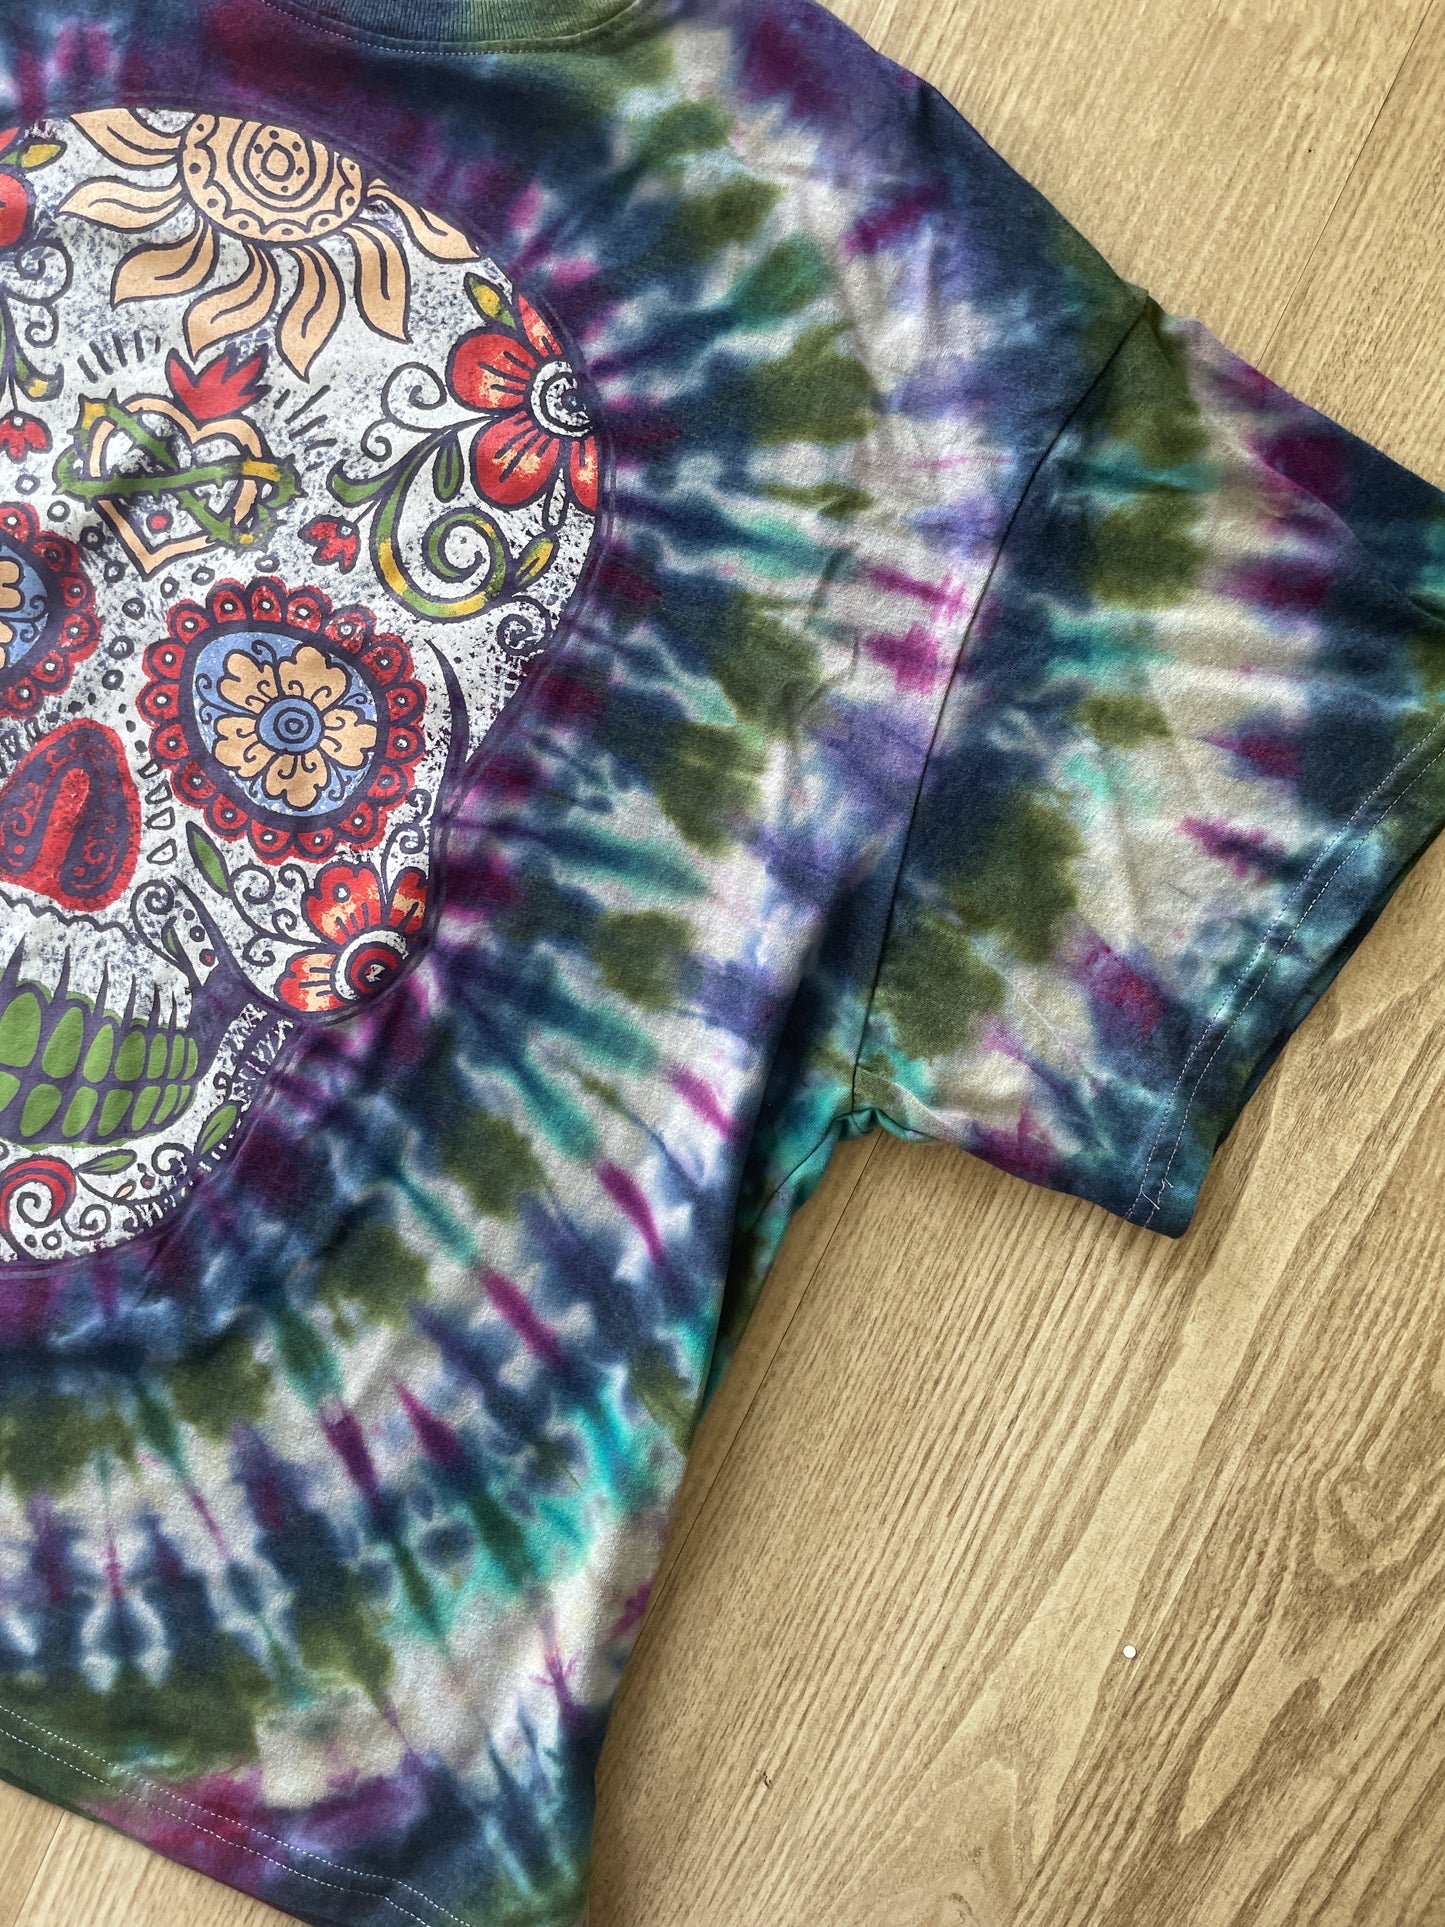 M/L Men’s Sugar Skull Reverse Tie Dye T-Shirt | One-Of-a-Kind Purple and Blue Pleated Short Sleeve